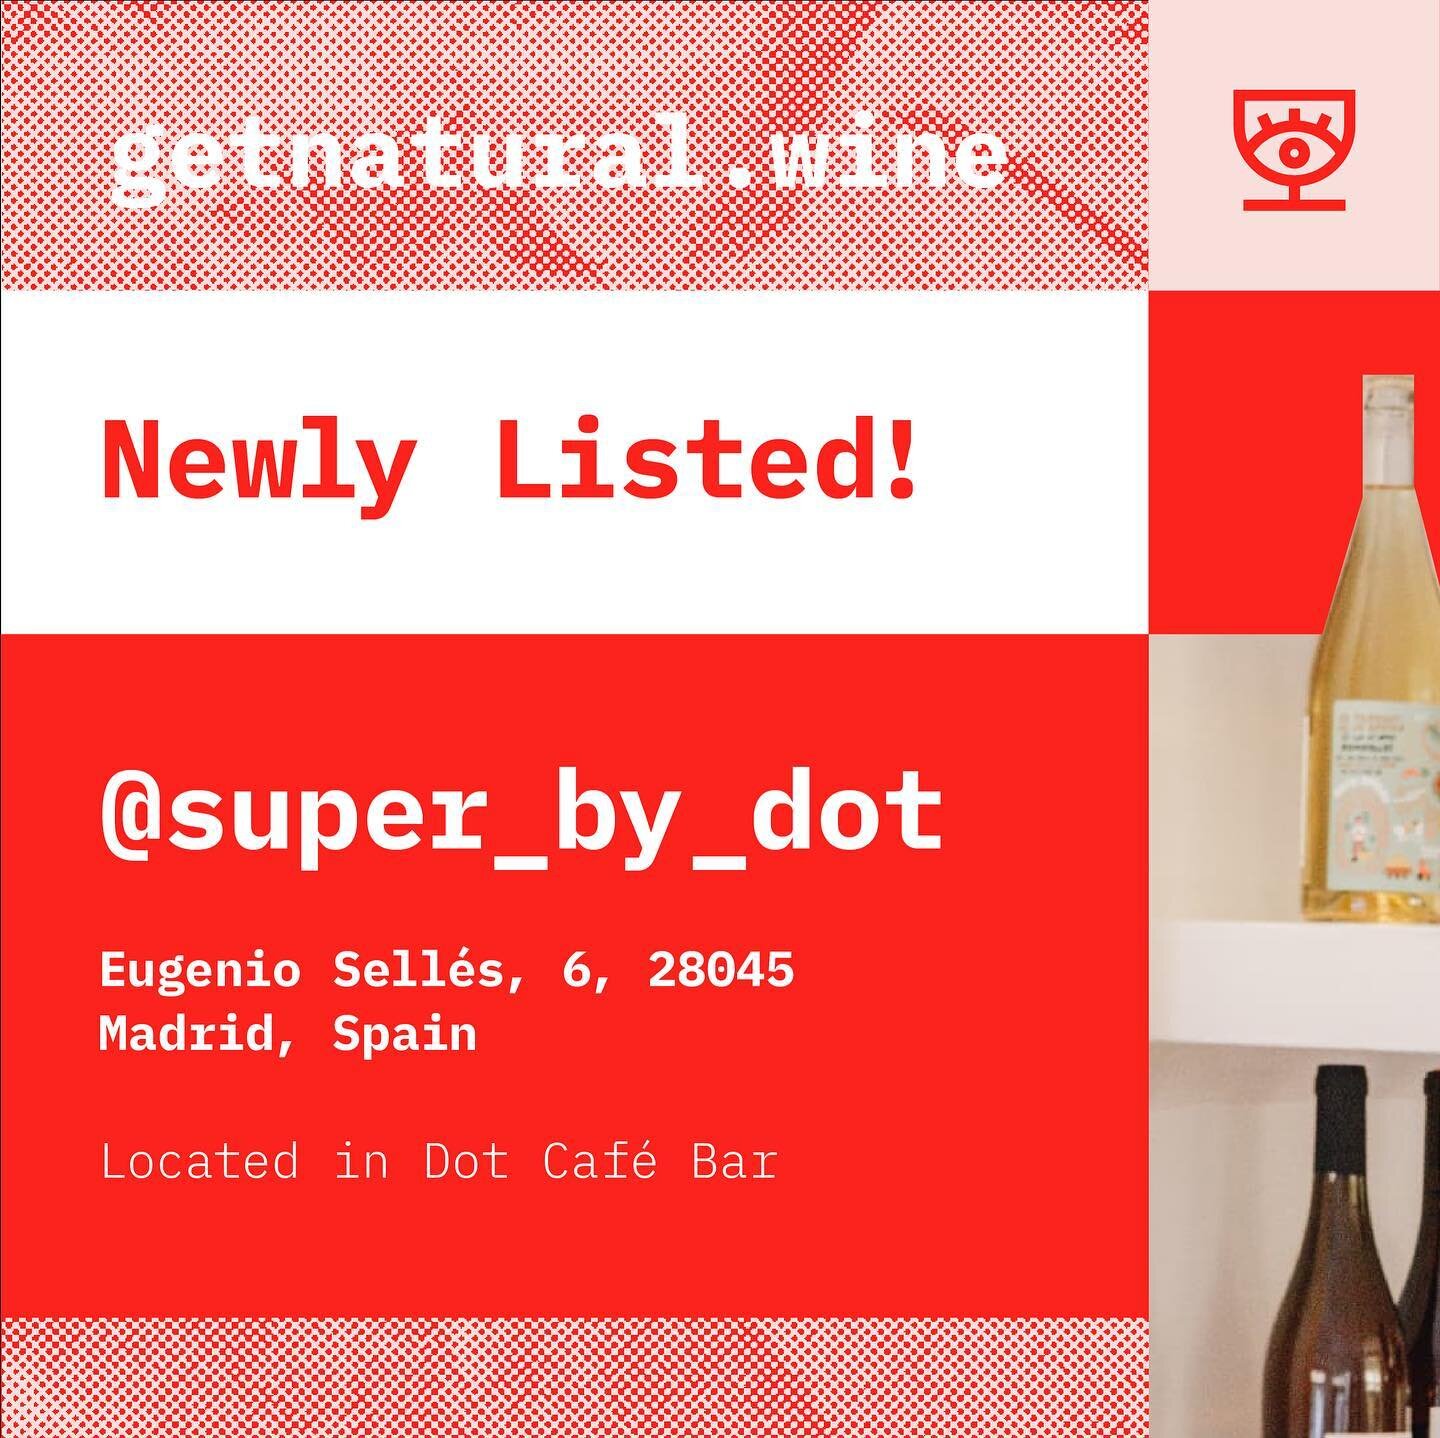 Welcome @super_by_dot! International Listings are OPEN! 🍷 🗺 🇪🇸

We can&rsquo;t wait to get to know every one of you in this vast community. Let&rsquo;s connect all growers, makers, merchants, and lovers of natural wine today!

#naturalwine #findn